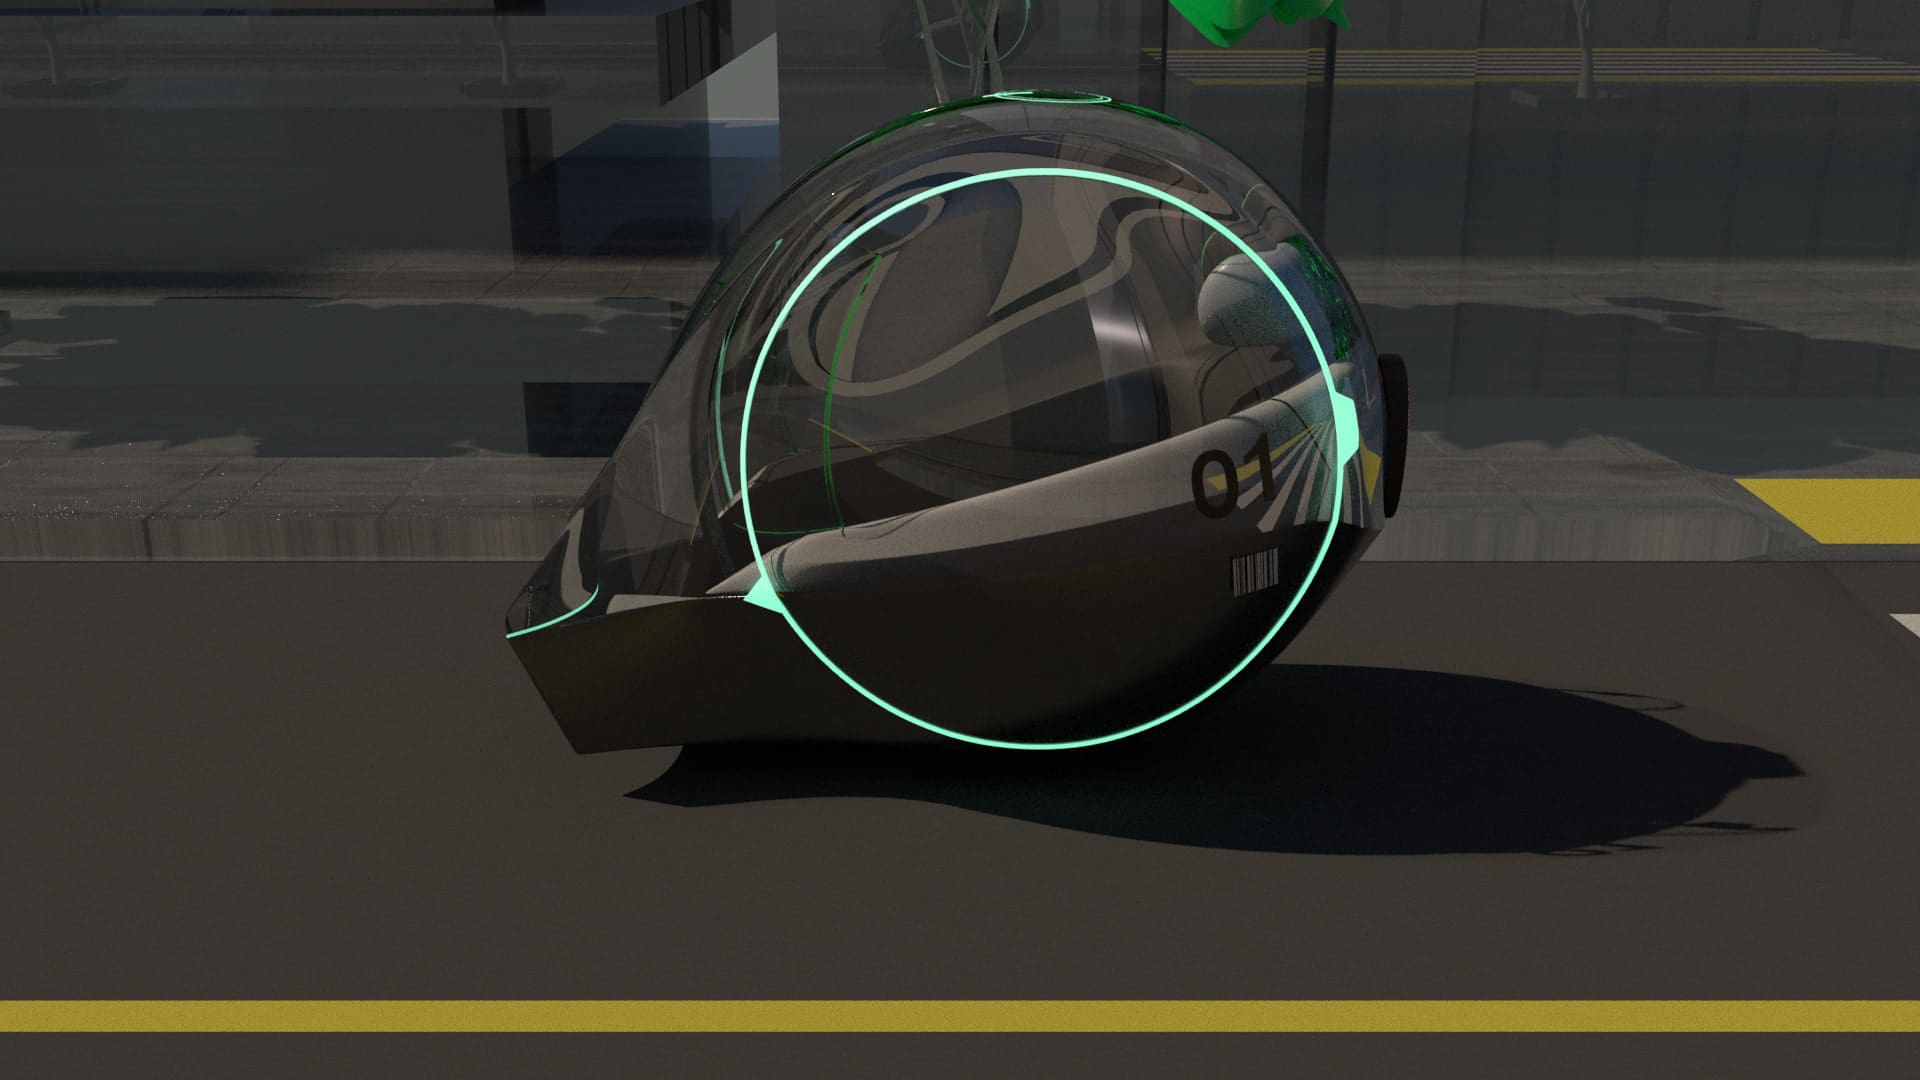 Digital rendering of a small spherical black vehicle driving on the road. There is a blowing blue ring on the side of the vehicle and a black number one.